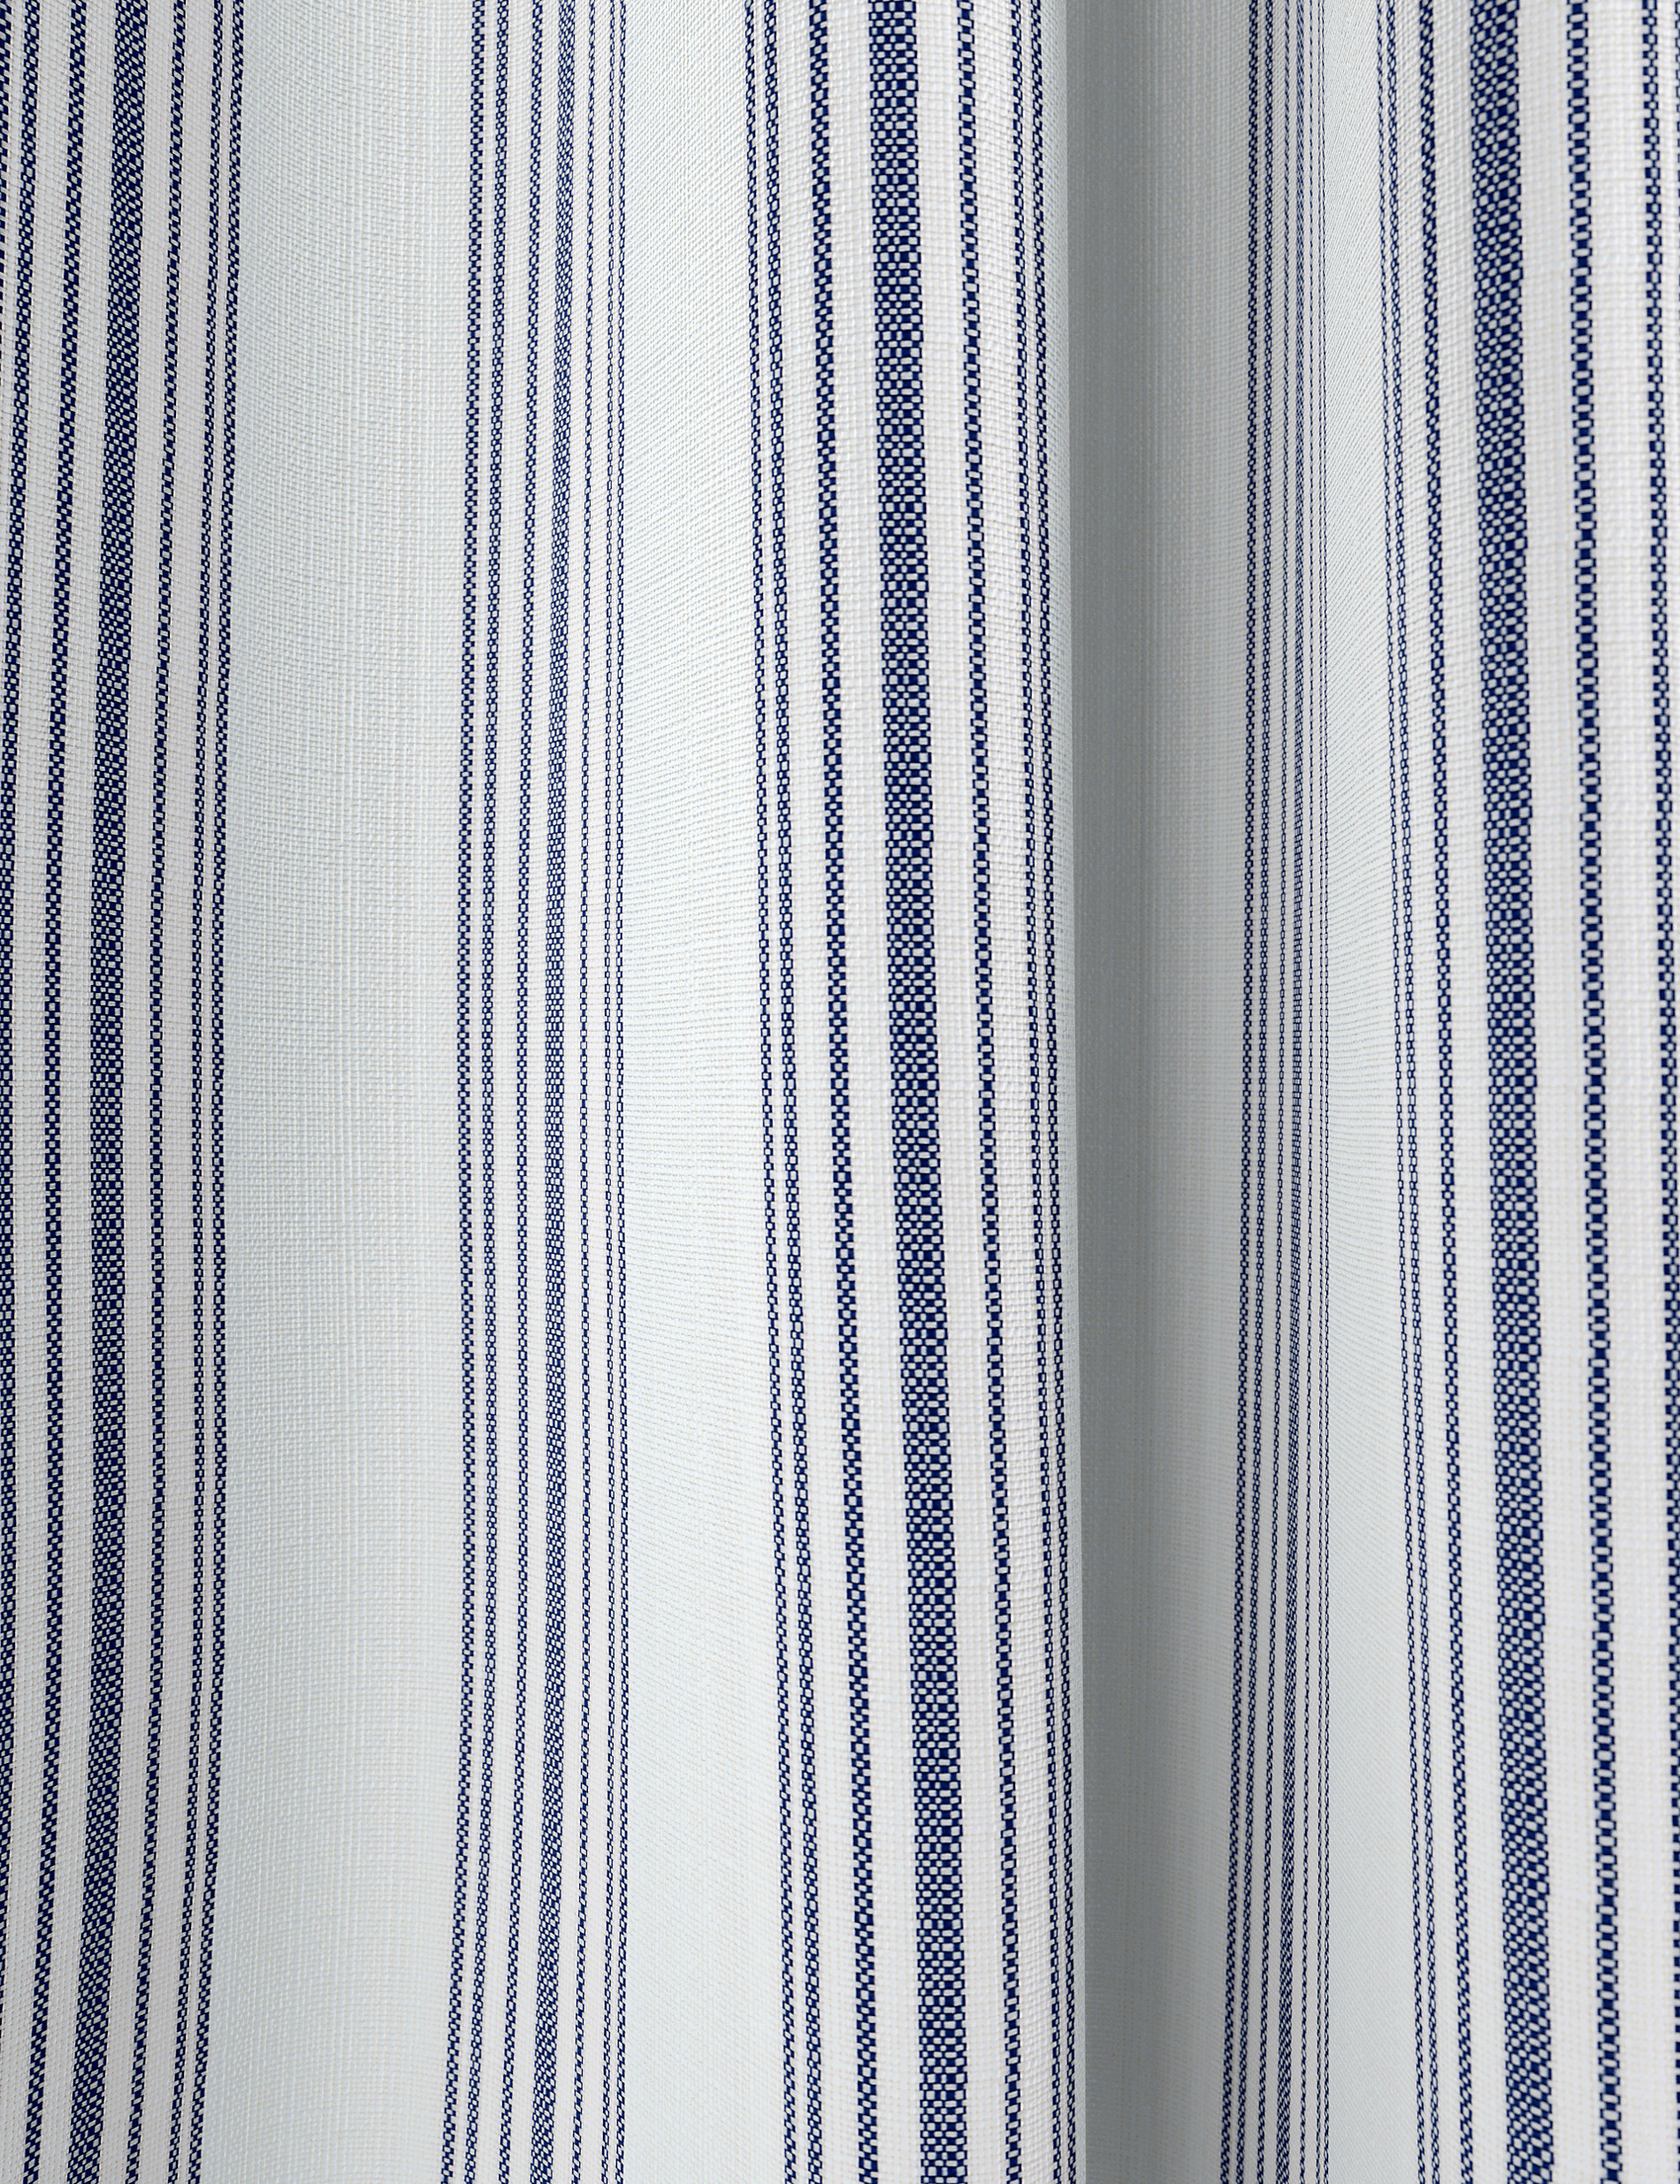 Woven Striped Eyelet Curtains